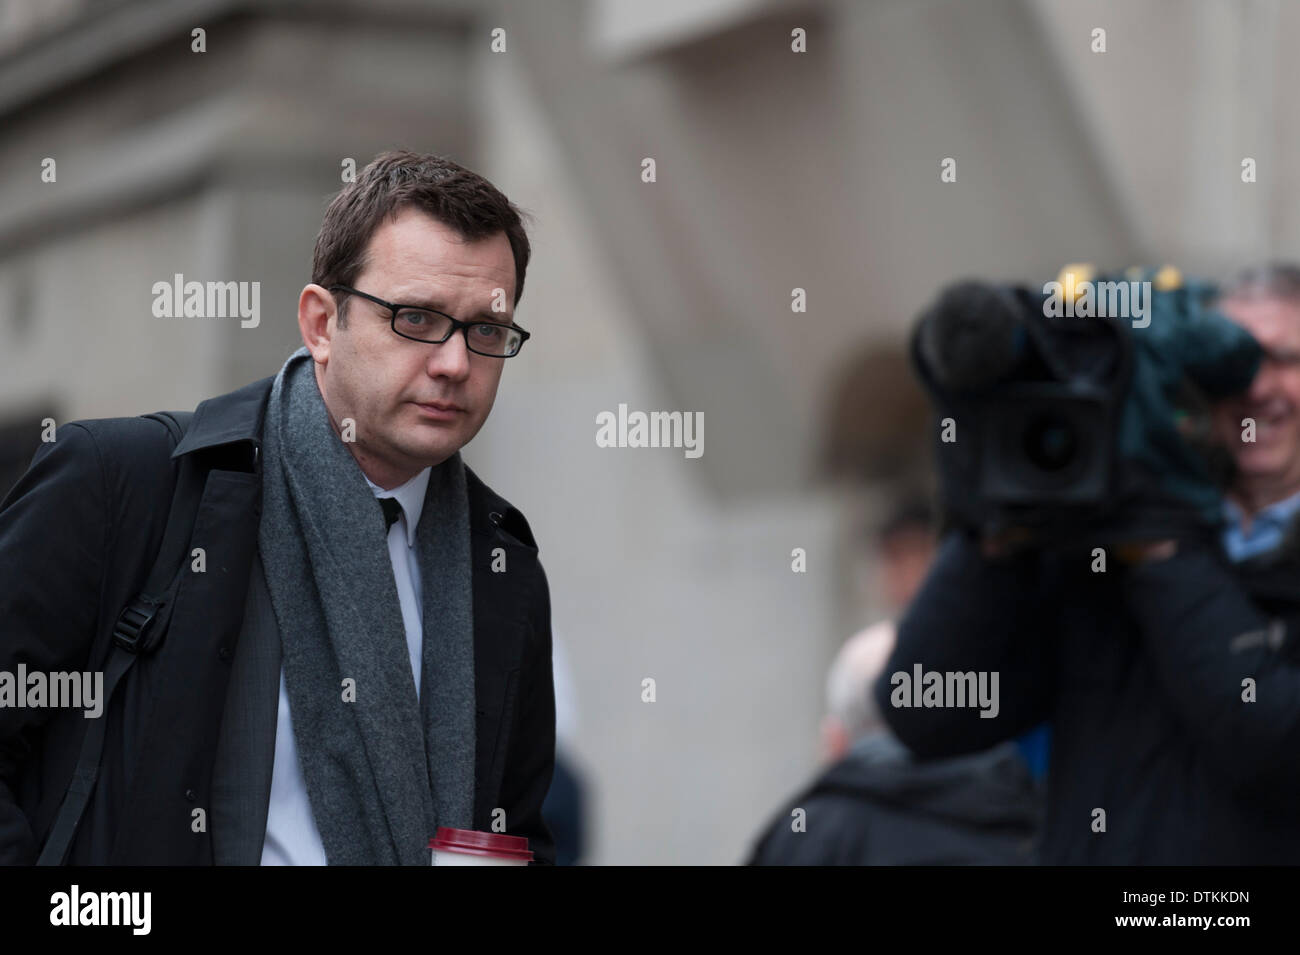 London, UK . 20th Feb, 2014. The phone-hacking trial continues at the Old Bailey in London with former News of the World executives entering their second day of their defence against allegations of illegally intercepting voicemail messages on mobile phones amongst other related charges. Pictured: Andy Coulson (left). Credit:  Lee Thomas/Alamy Live News Stock Photo